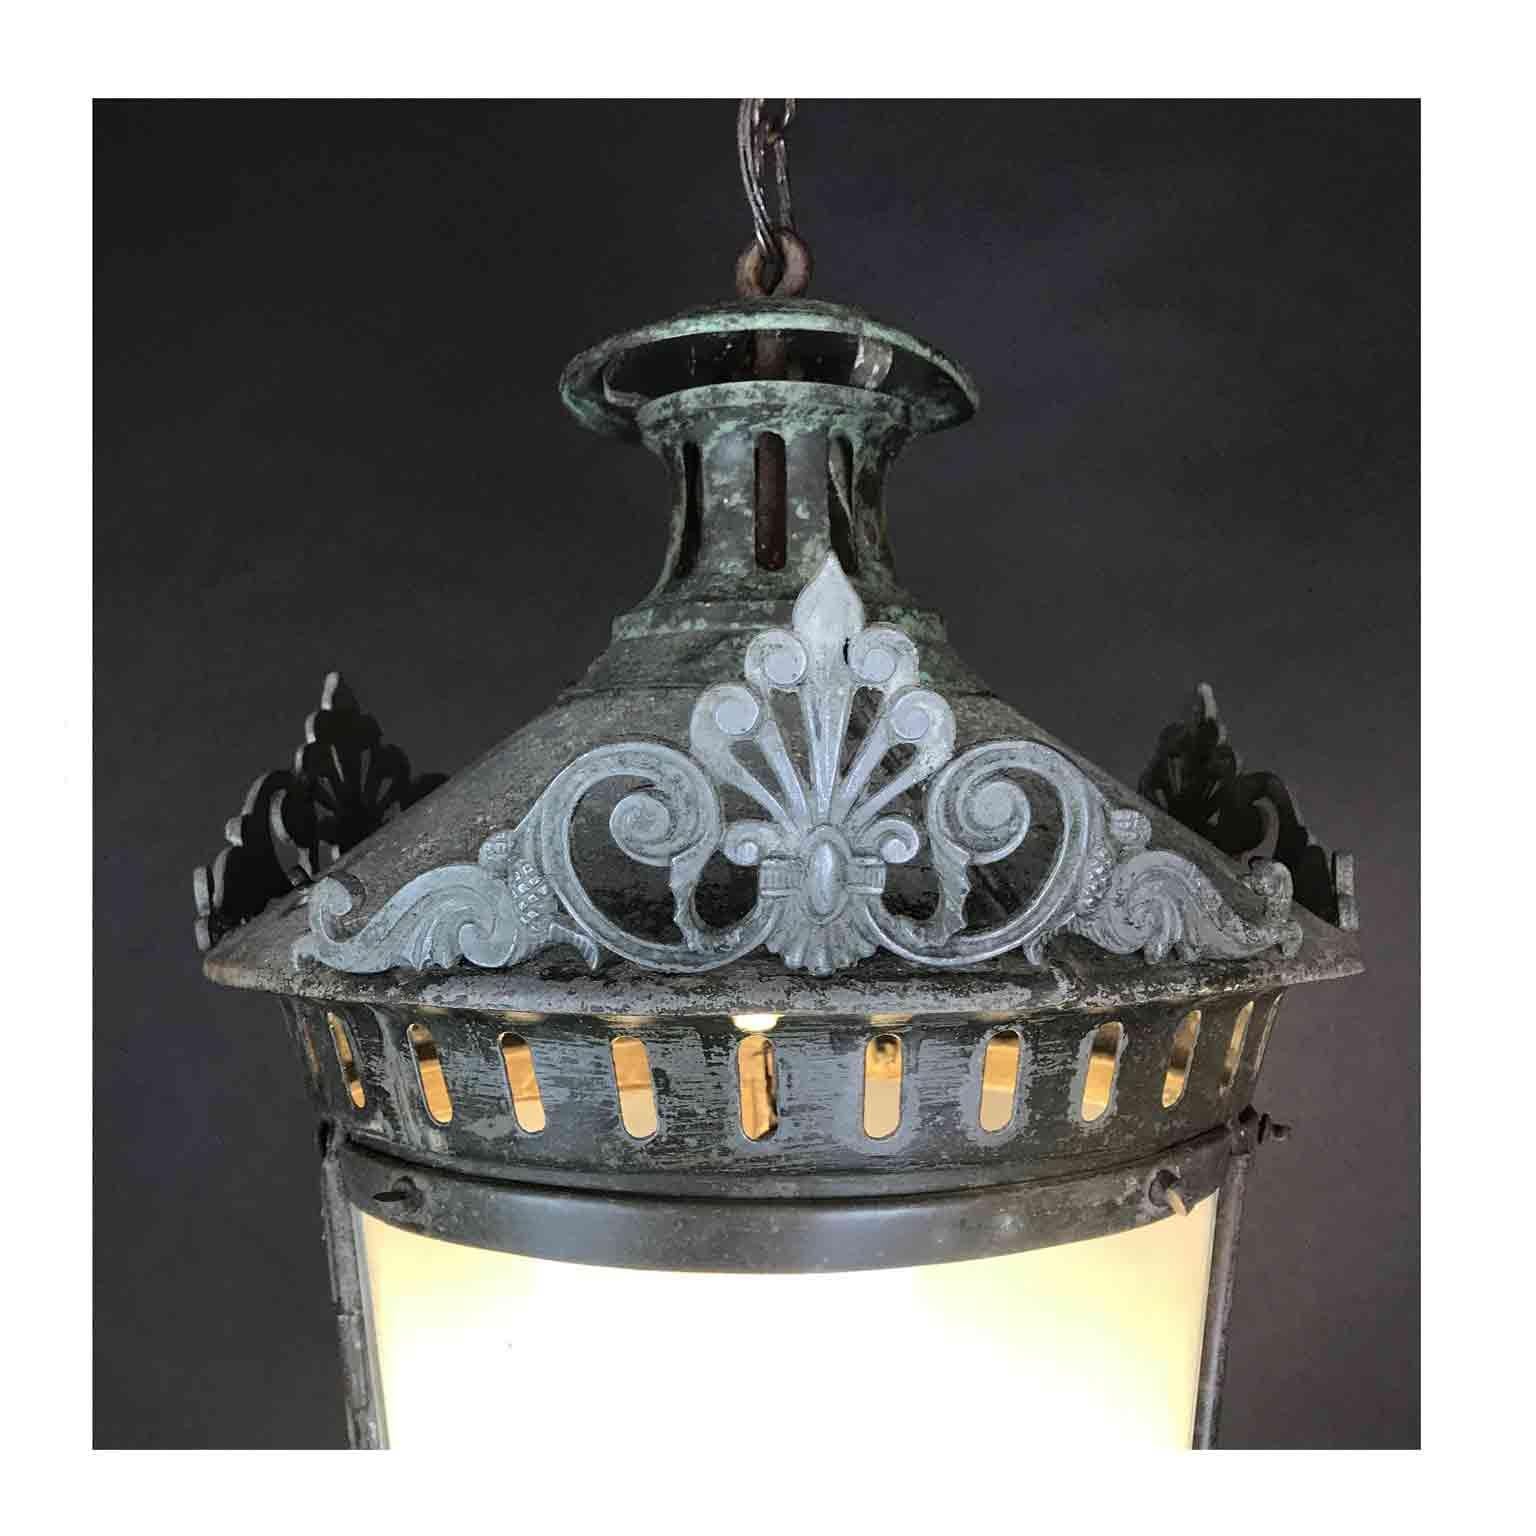 A charming Art Deco hanging hall lantern from Italy, a circular zinc lantern with three original curved frosted glass, one set in the frame of a window.

This antique interior lantern is finely decorated in the upper part by three cast metal